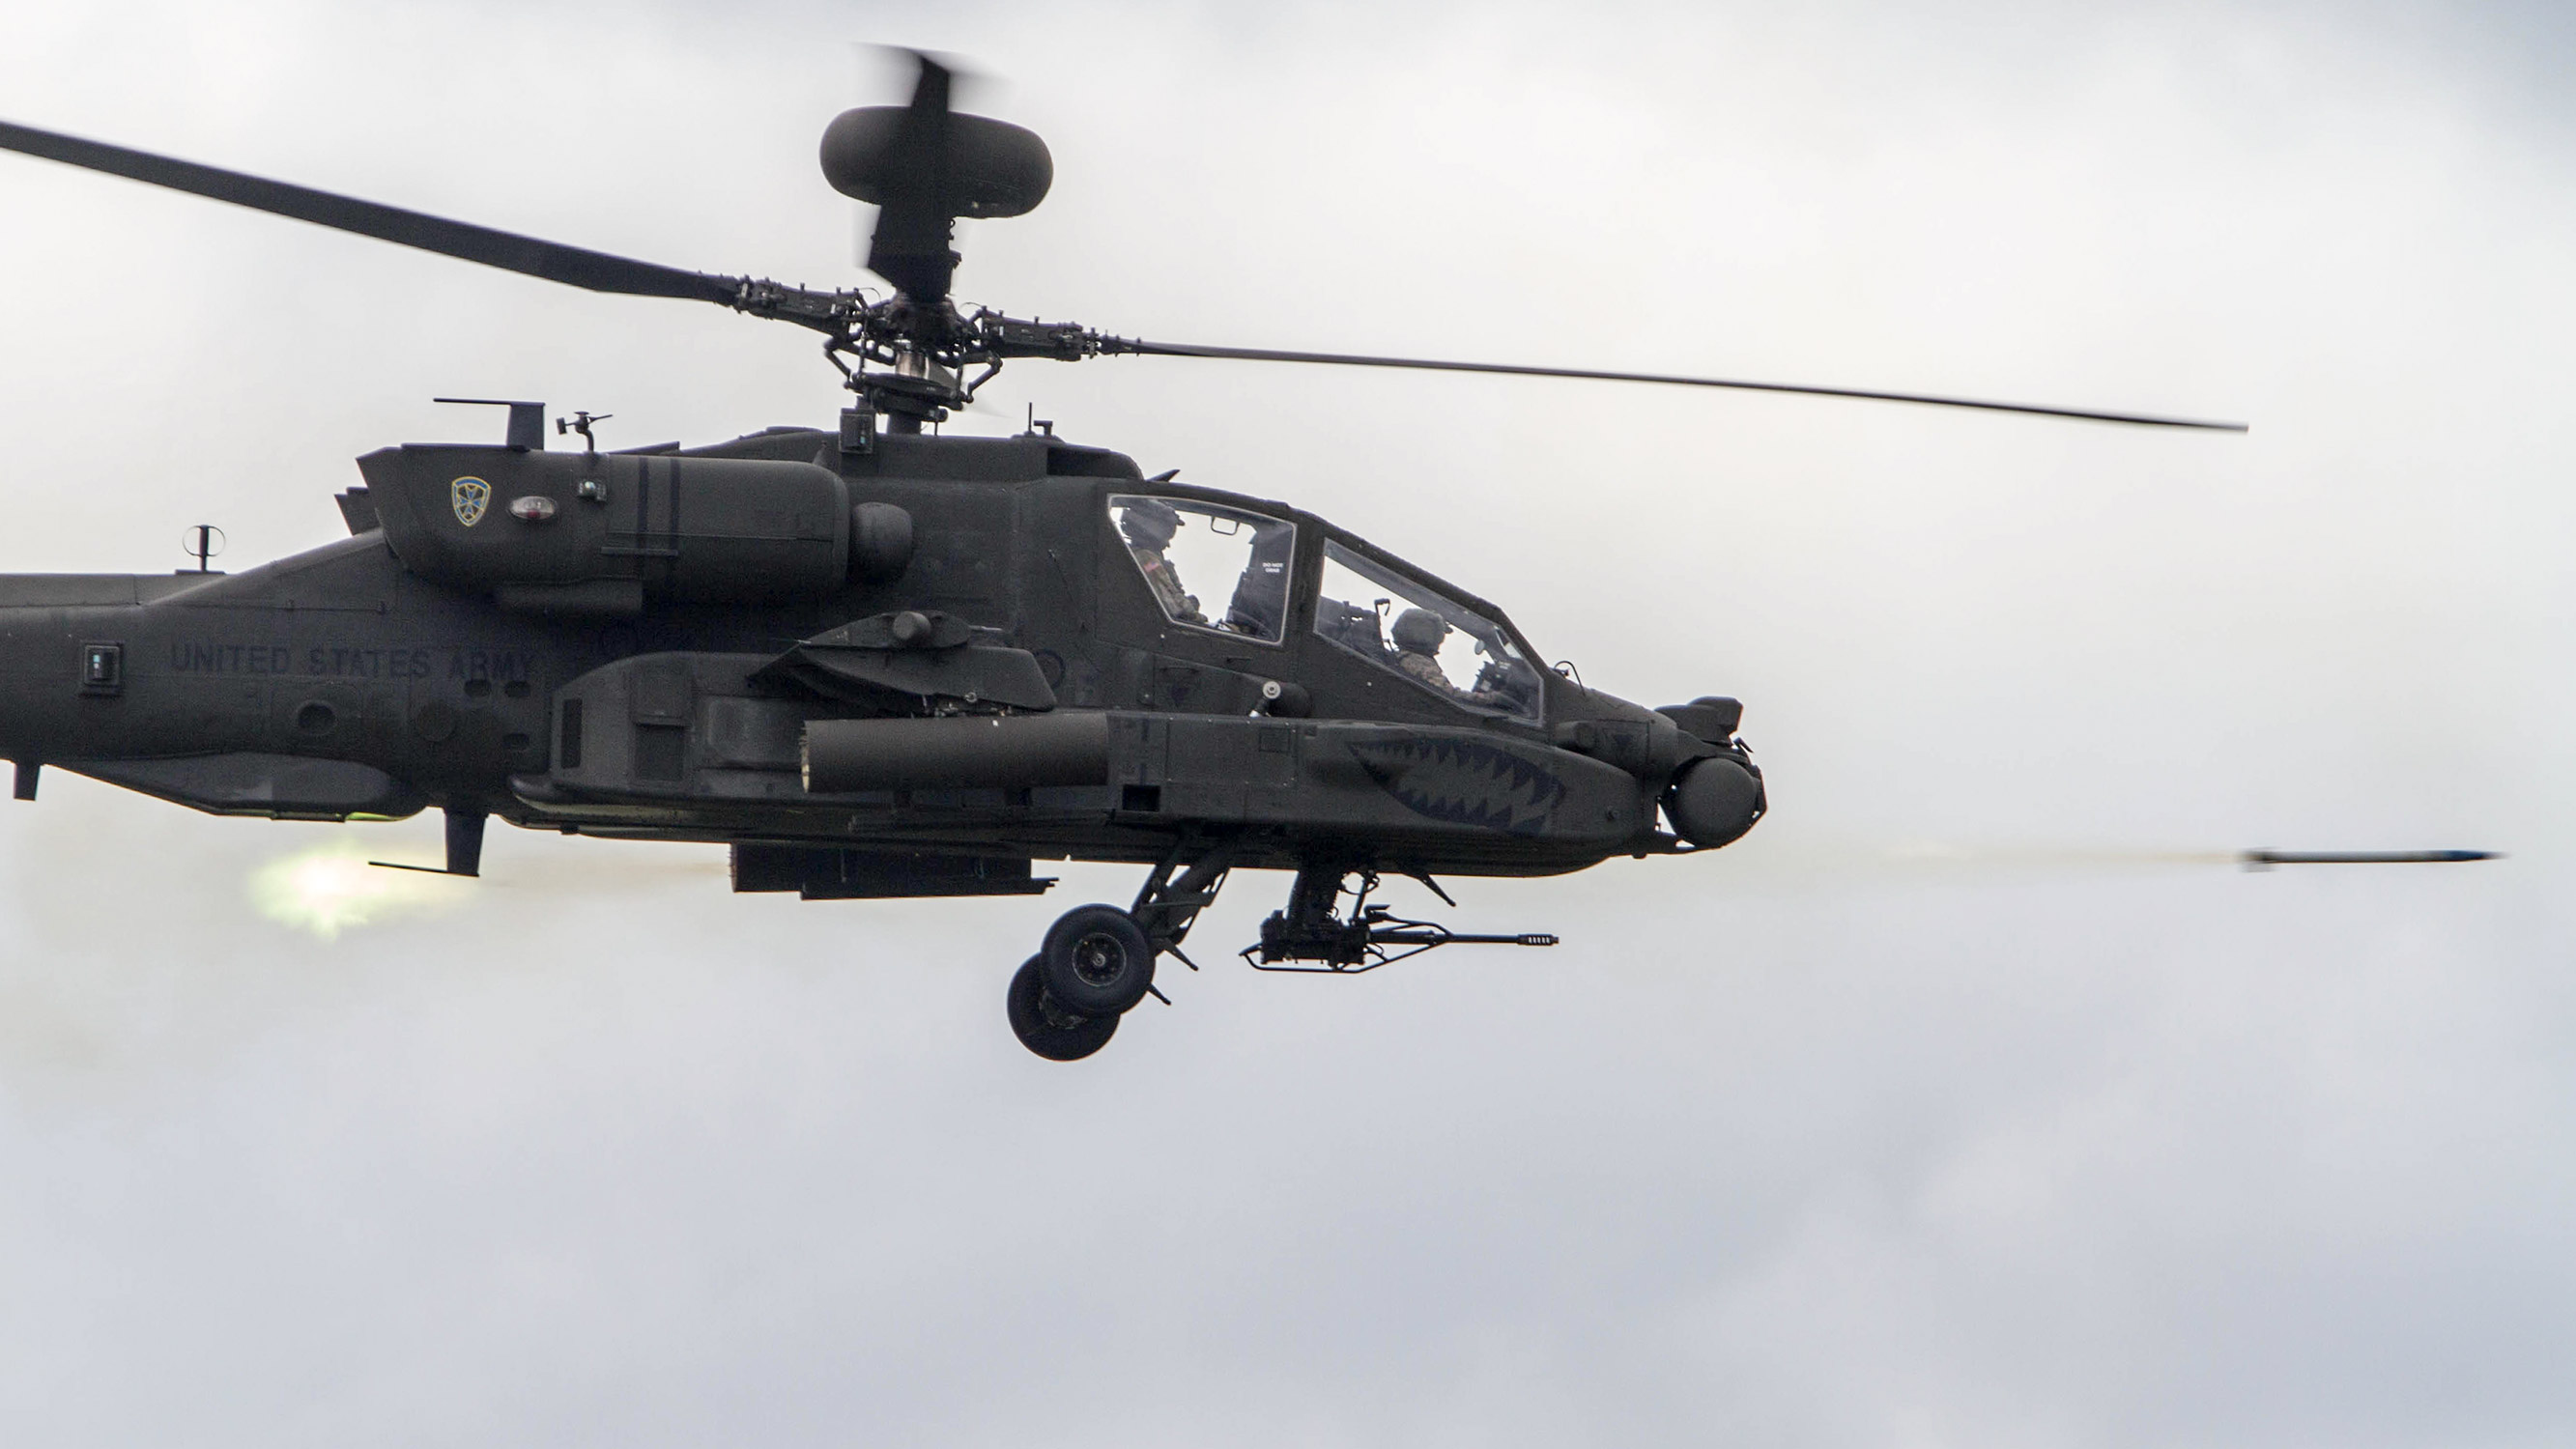 US Army AH-64E Apache helicopter fires Hydra 70 rocket